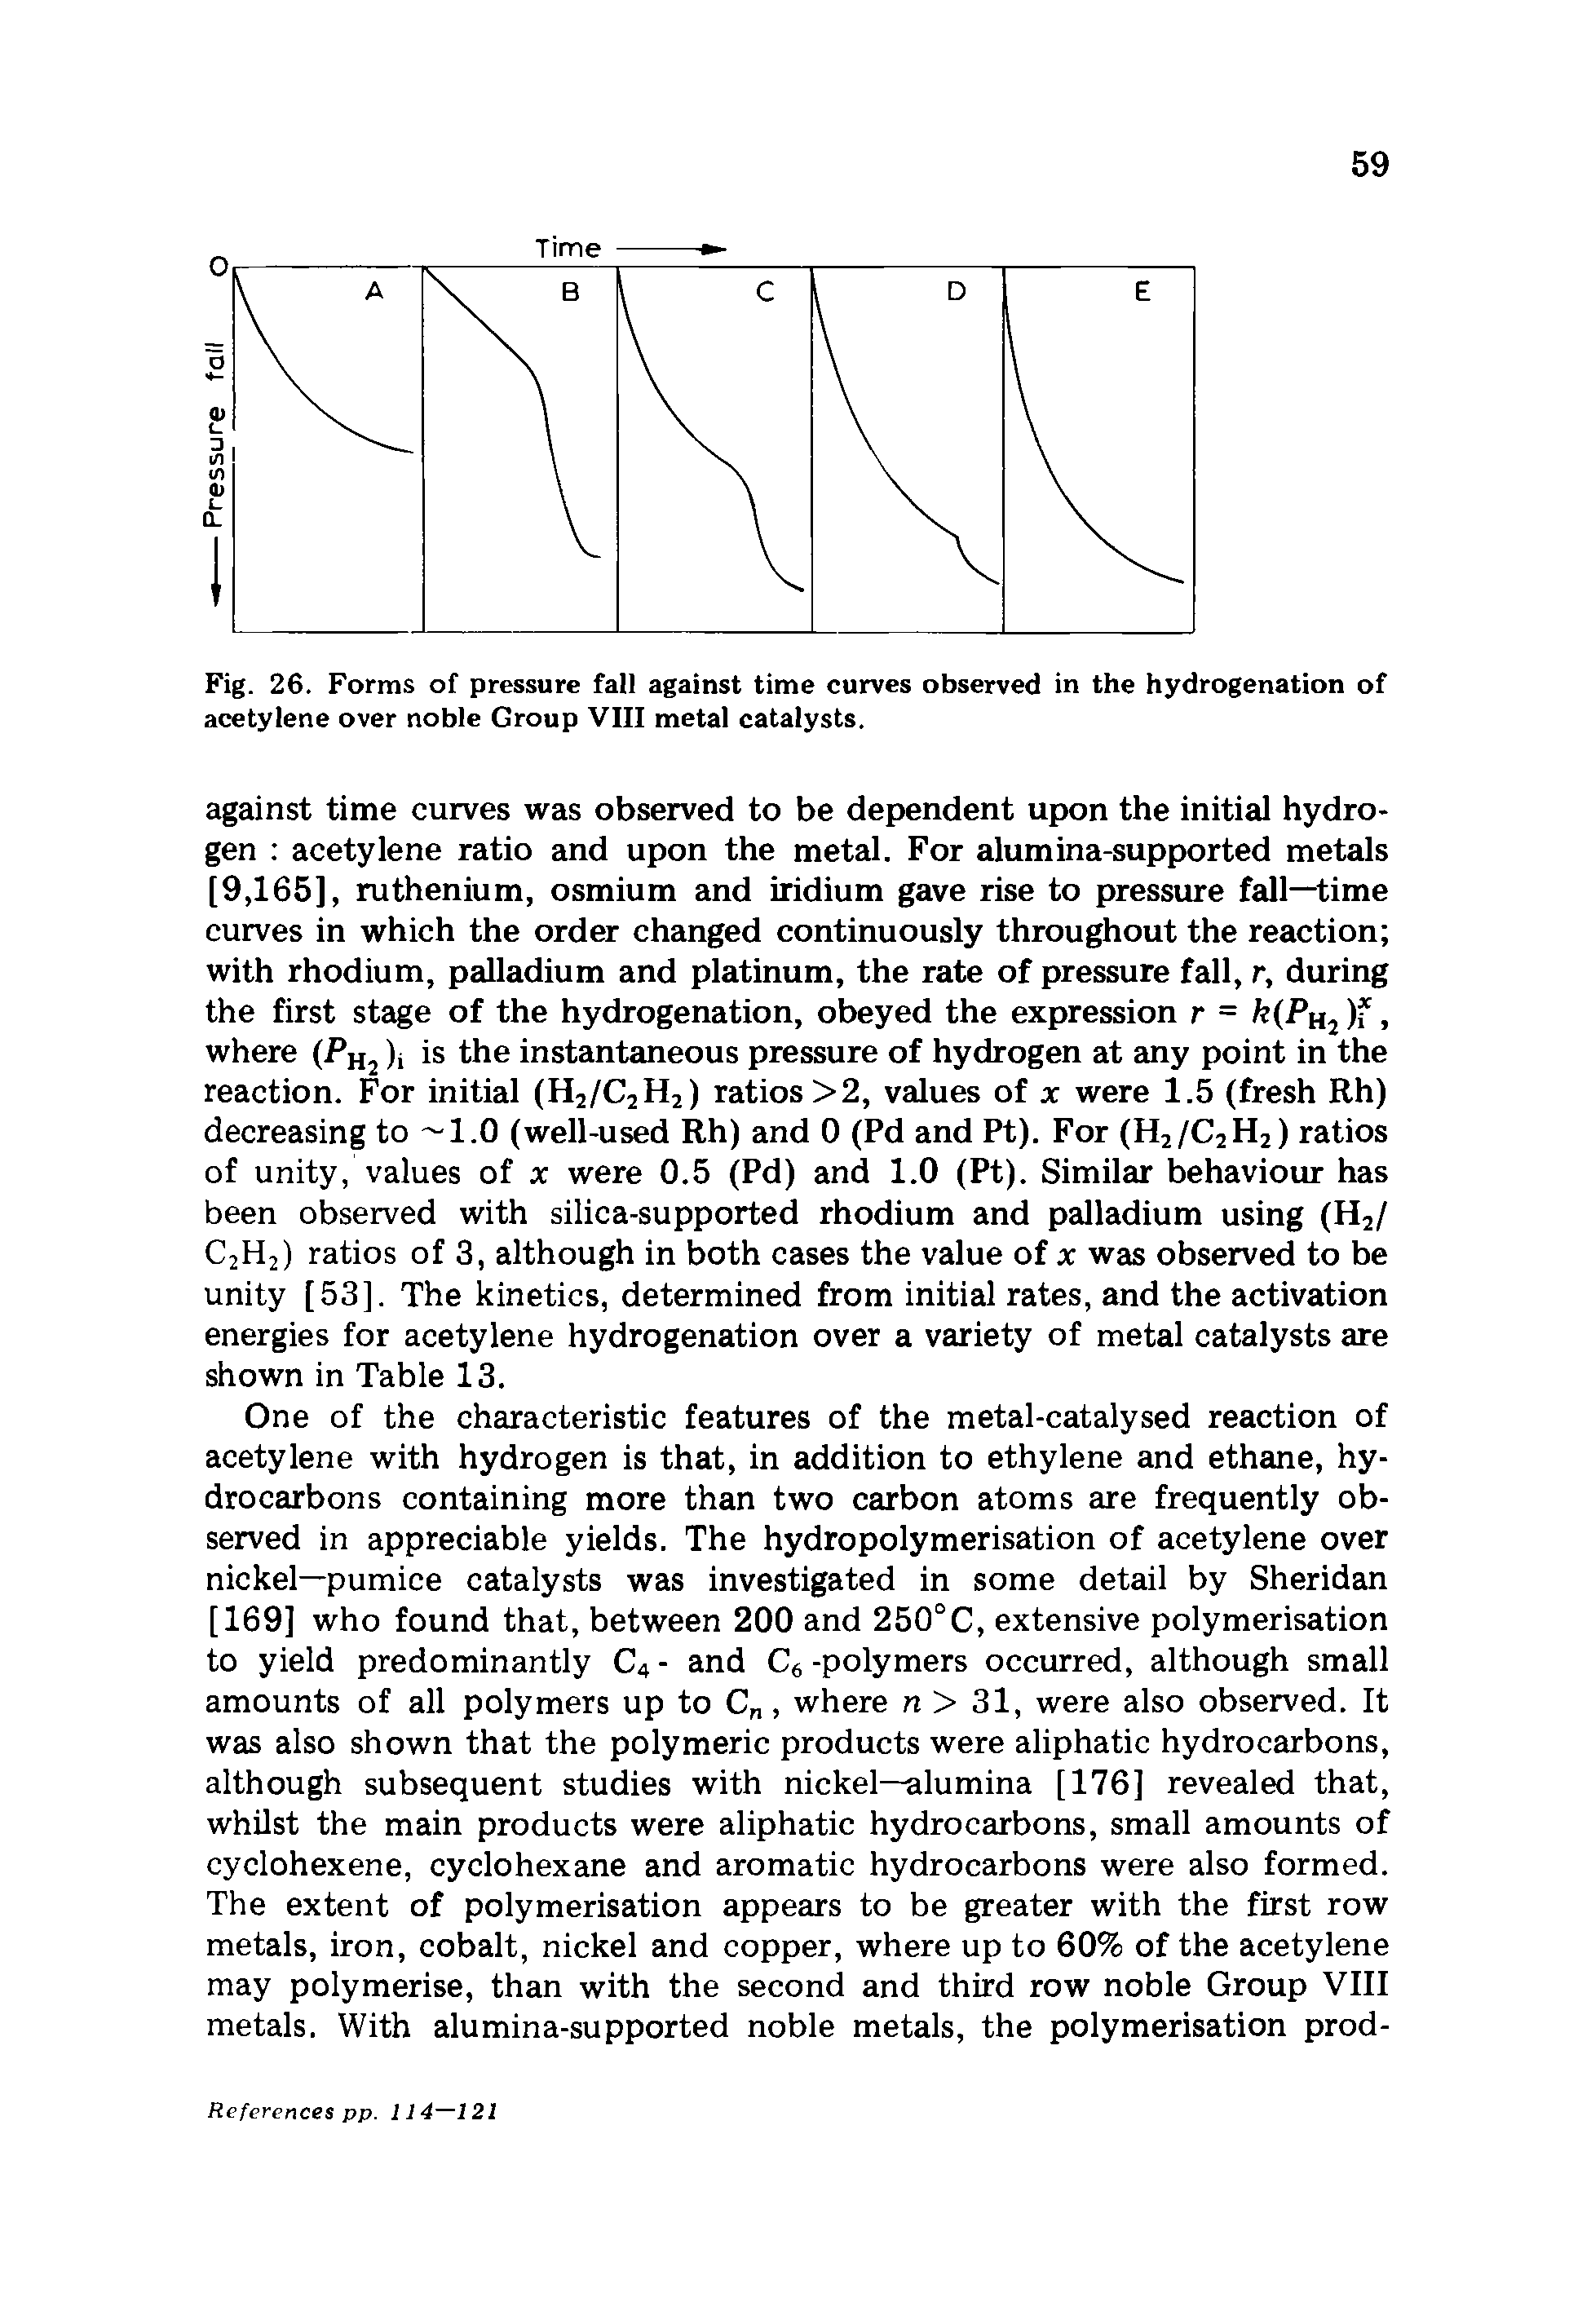 Fig. 26. Forms of pressure fall against time curves observed in the hydrogenation of acetylene over noble Group VIII metal catalysts.